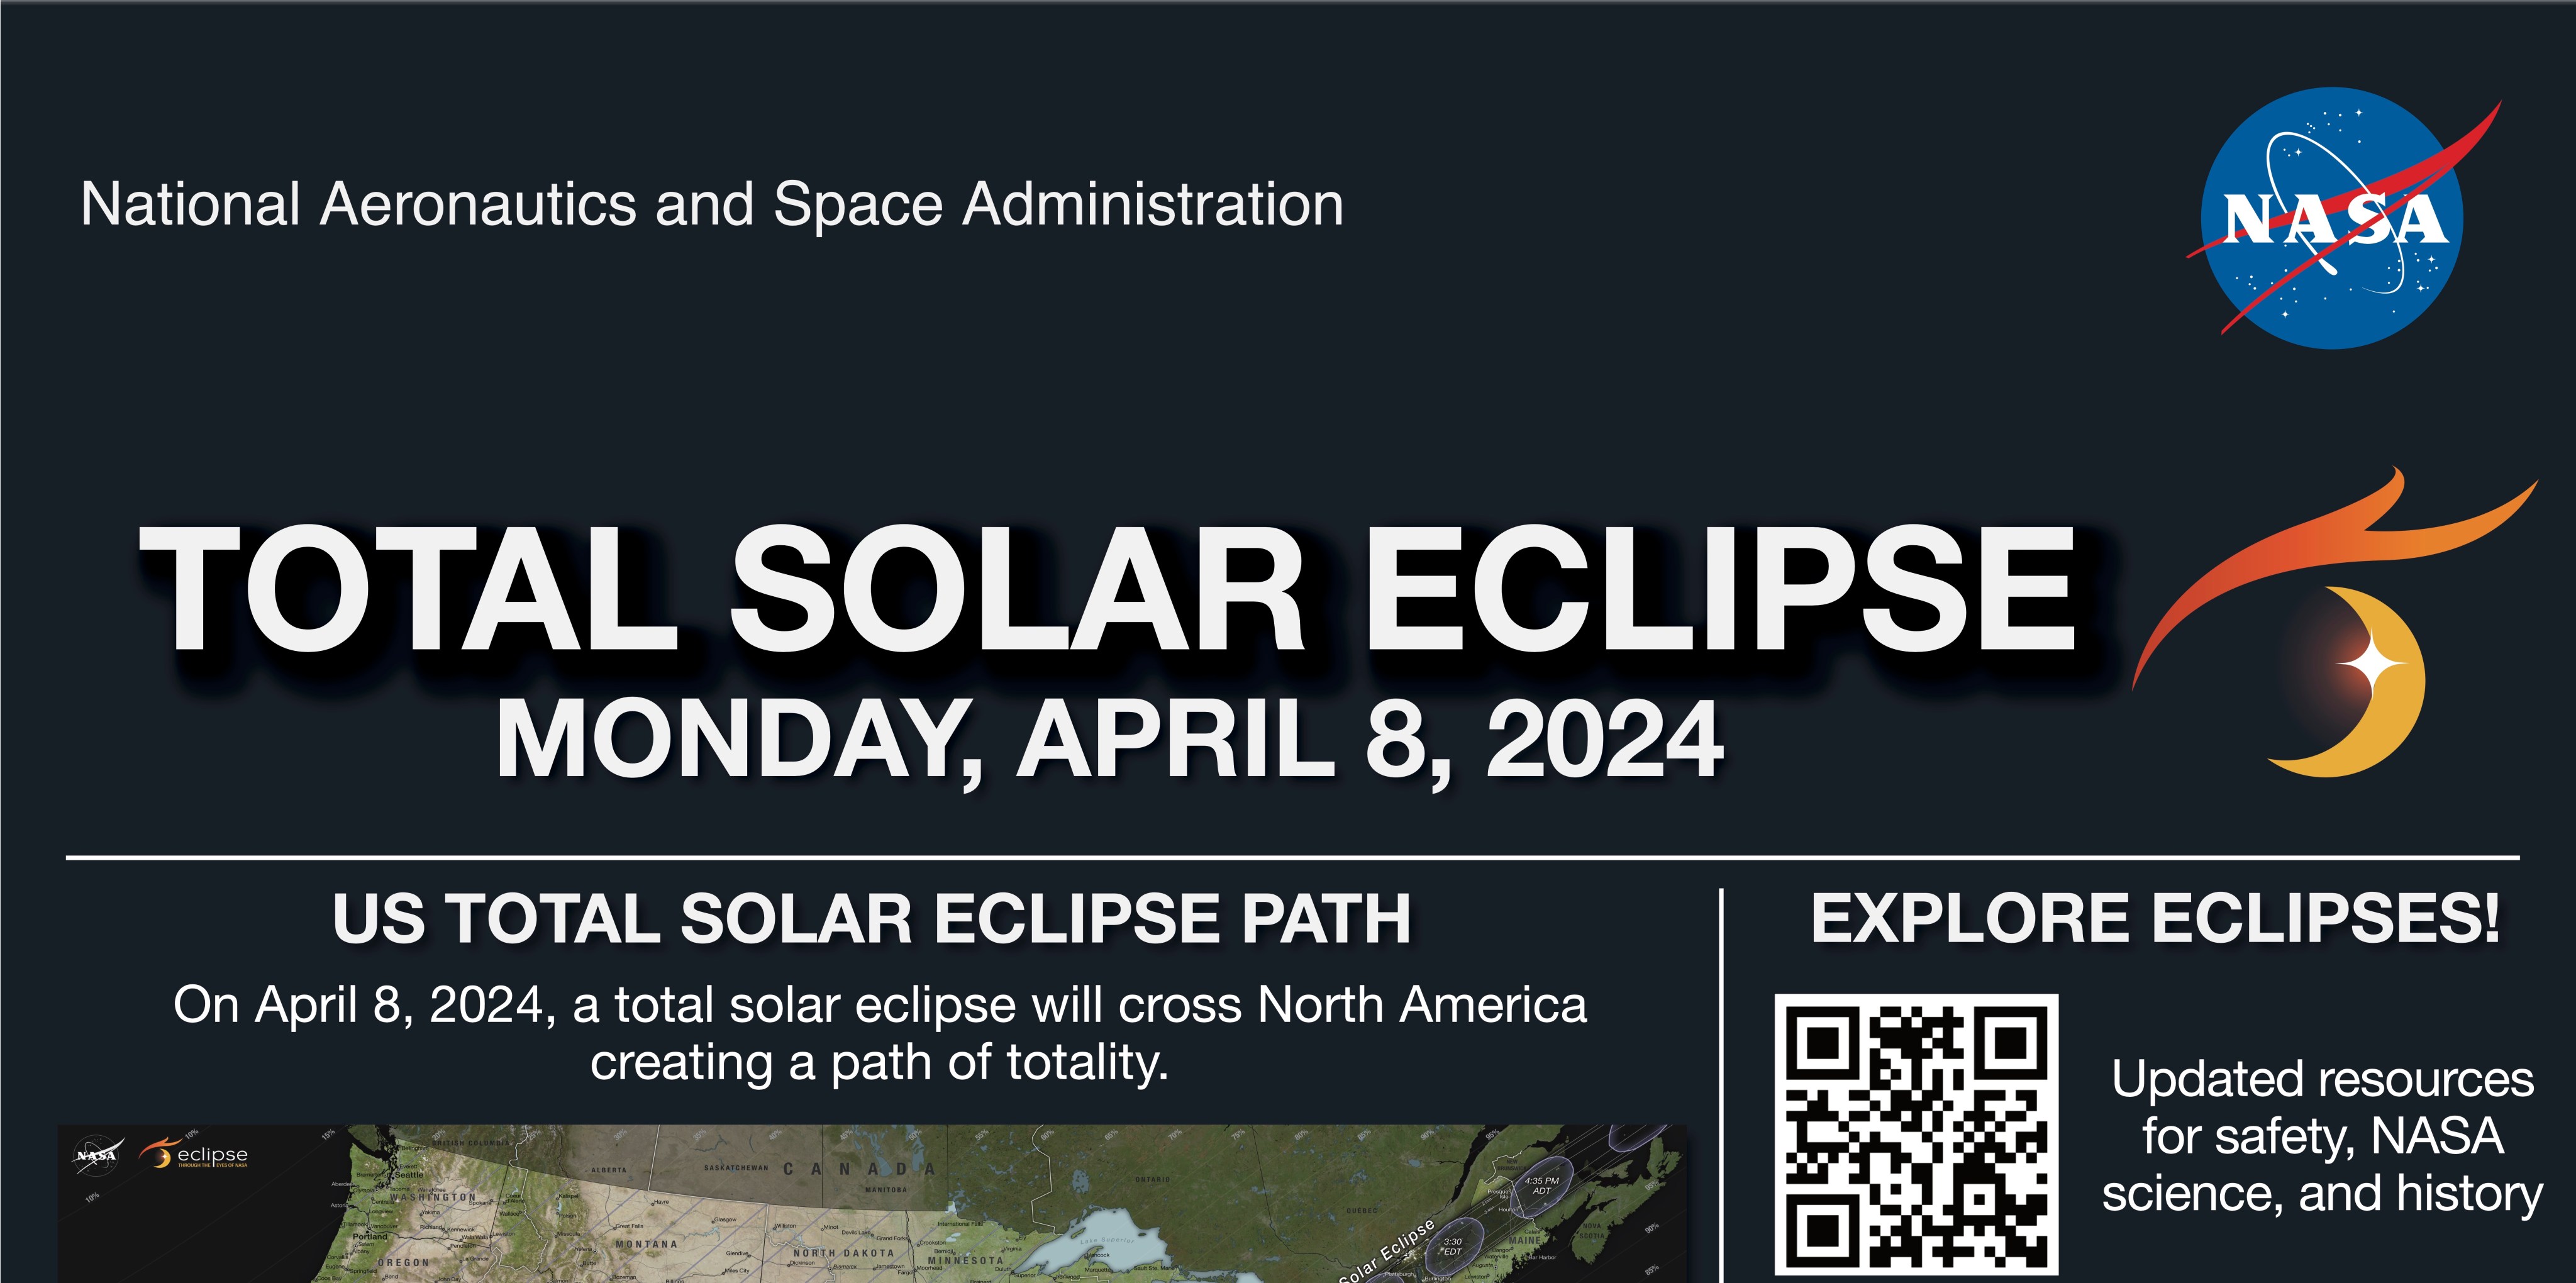 A portion of the total solar eclipse banner. Against a black background are the words "TOTAL SOLAR ECLIPSE, Monday April 8, 2024". Portions of sections with more information on the eclipse are cut off.